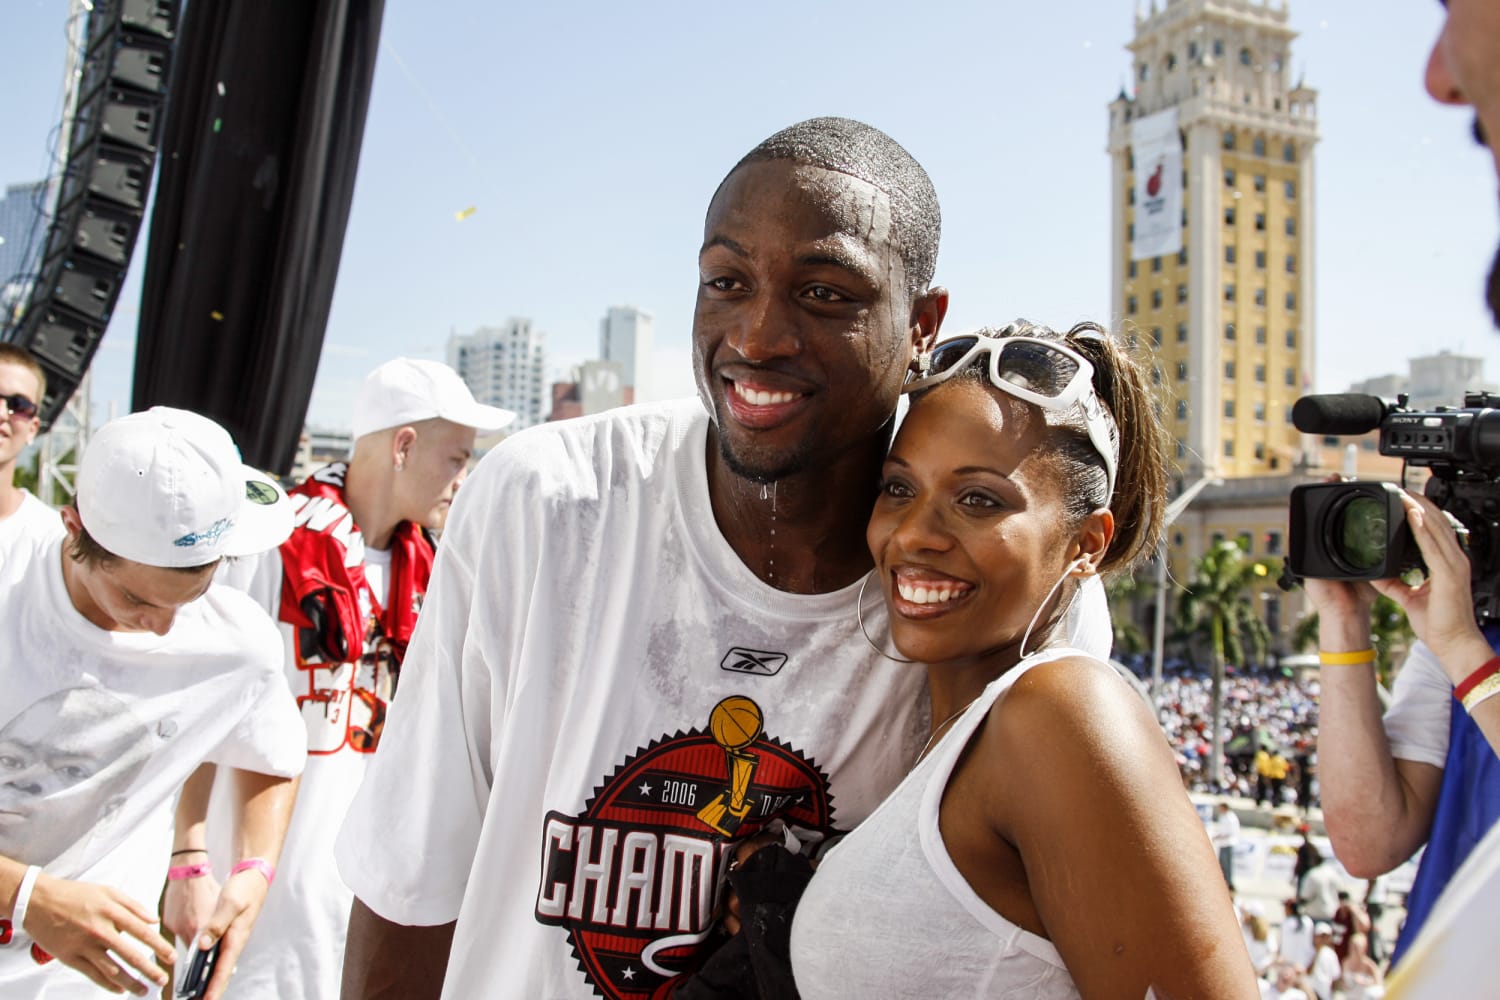 Dwyane Wade's perspective changed as he watched 'son  become into who  she now' is